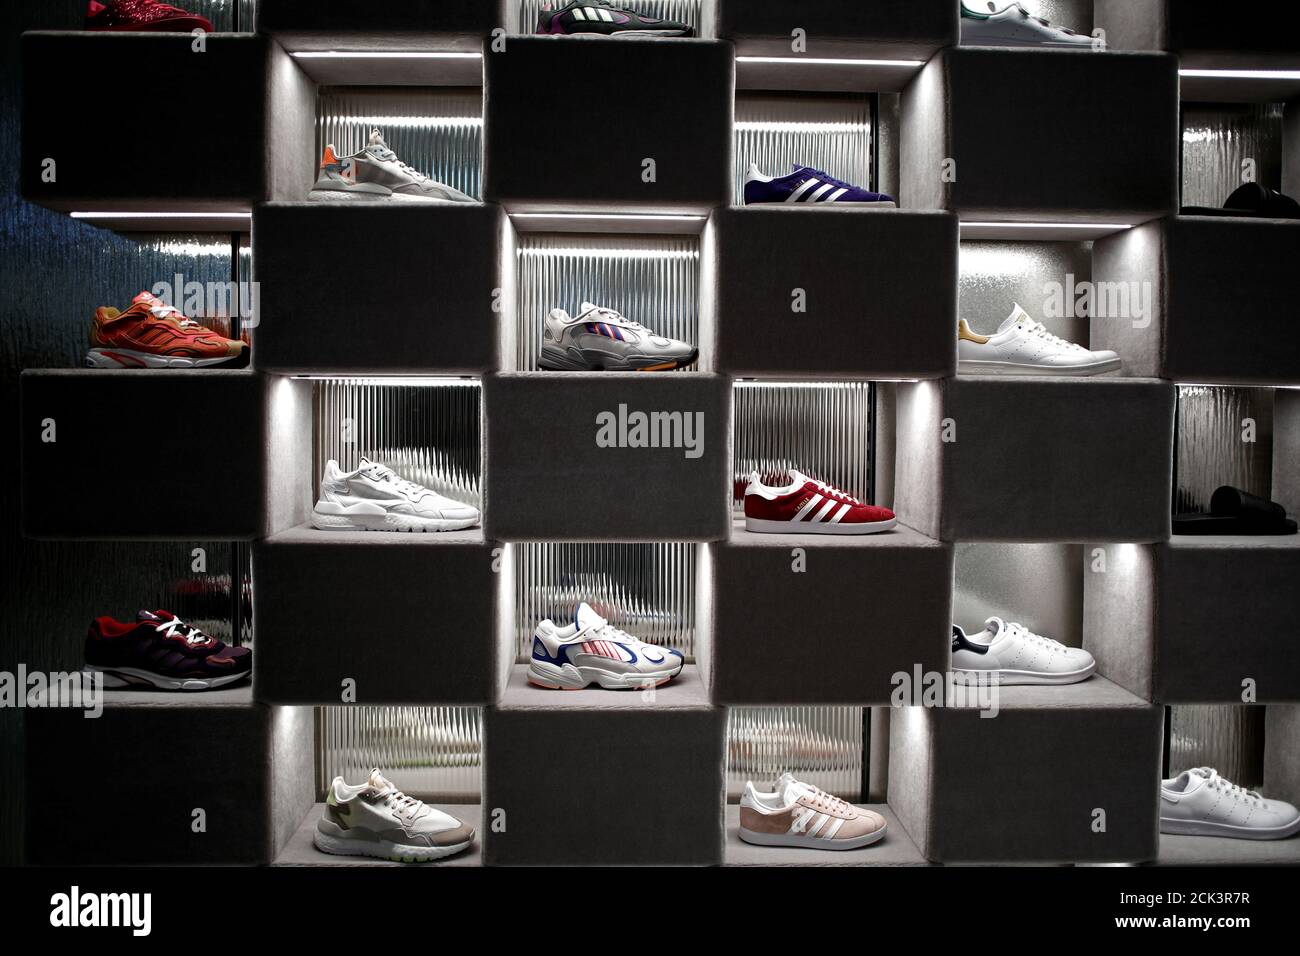 Adidas sneakers are displayed for sale at the Galeries Lafayette department  store on the Champs-Elysees avenue in Paris, France, April 11, 2019.  REUTERS/Benoit Tessier Stock Photo - Alamy